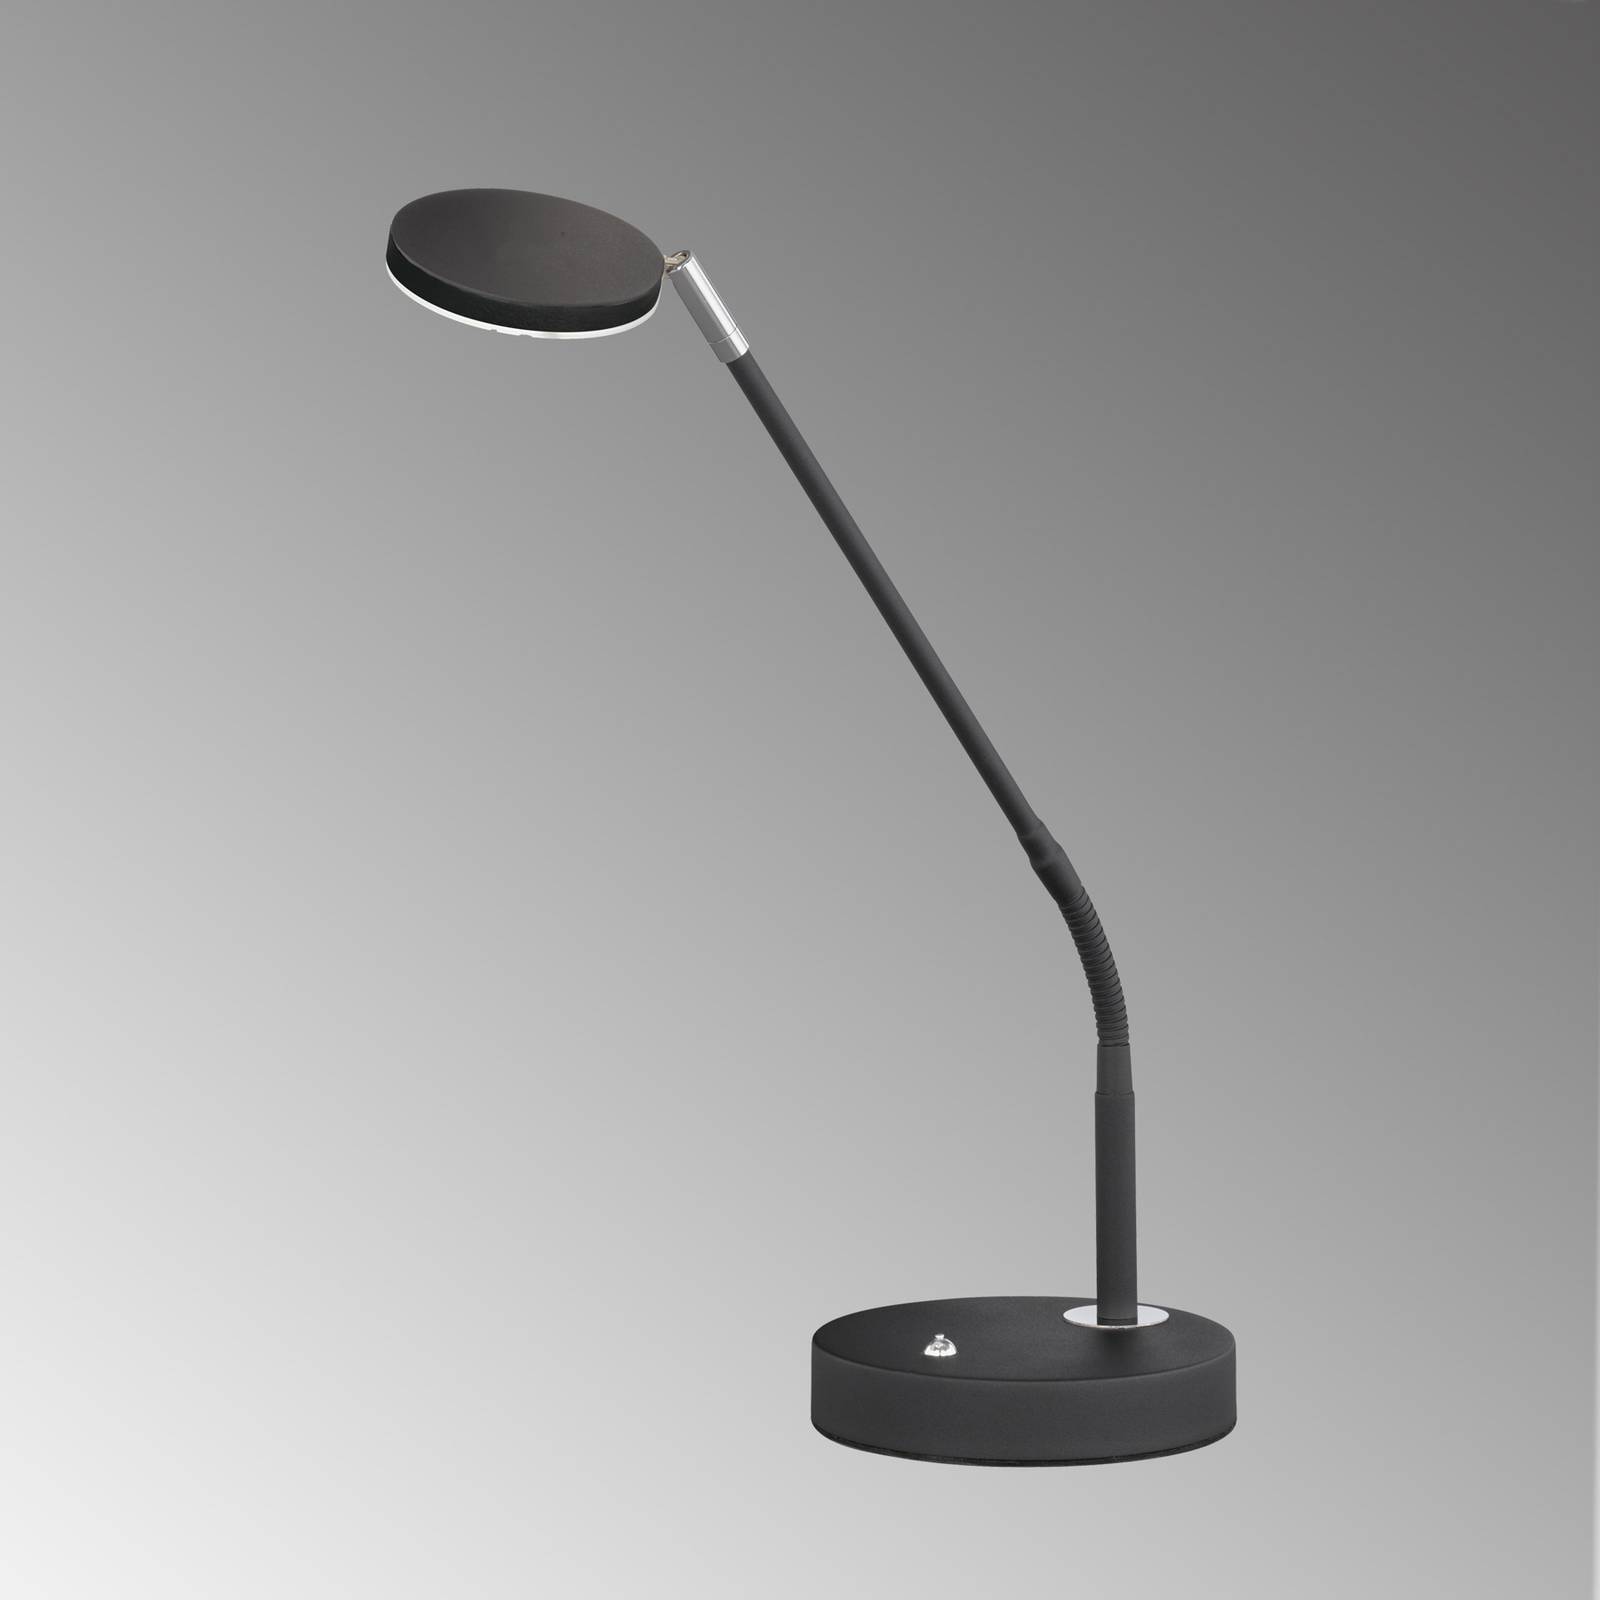 Image of FH Lighting Lampe à poser LED Lunia, dimmable, noir sable 4052231501562